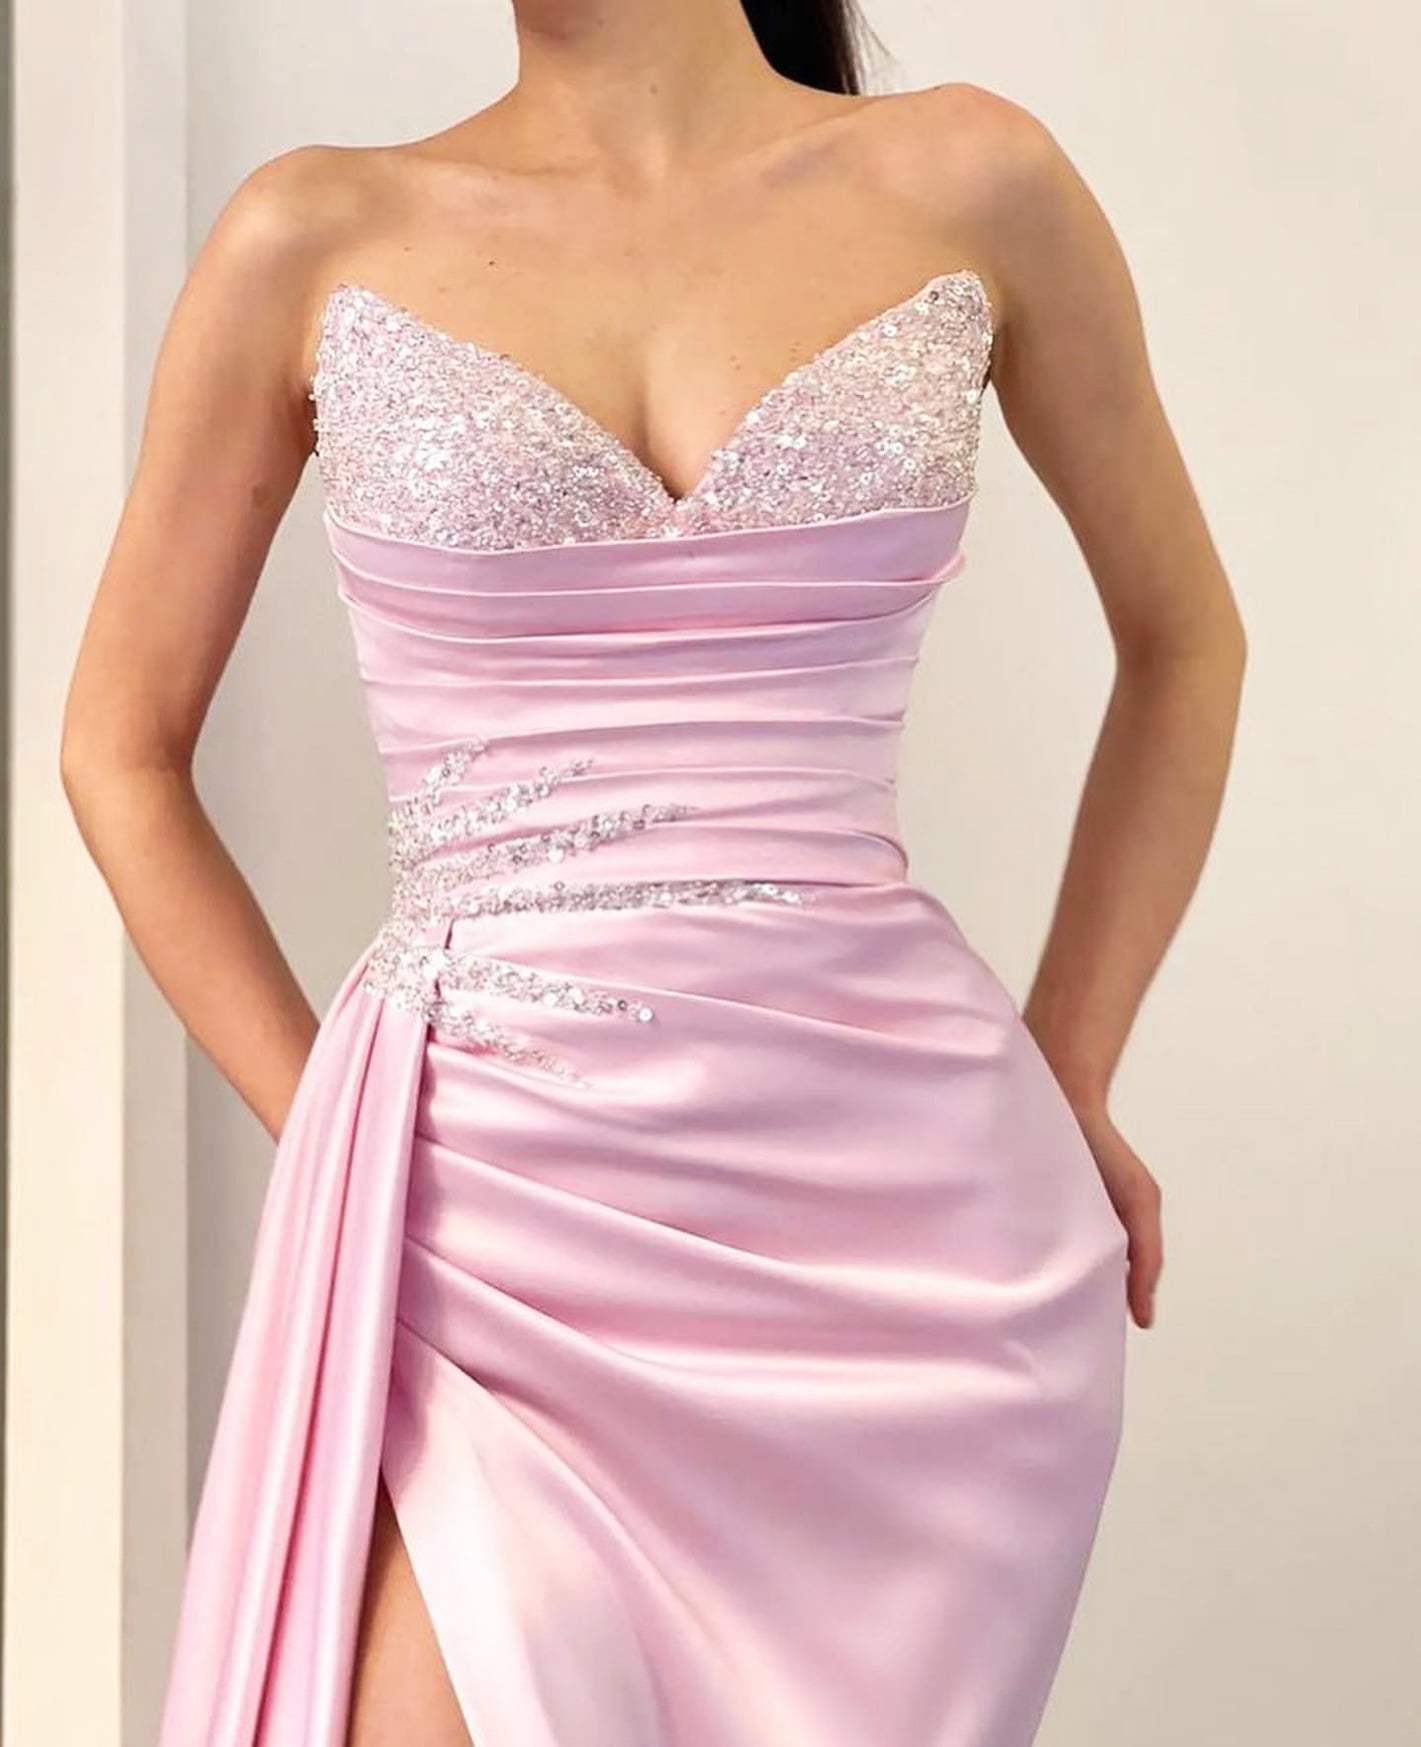 19 Gorgeous Long Prom Dresses and Gowns for 2022